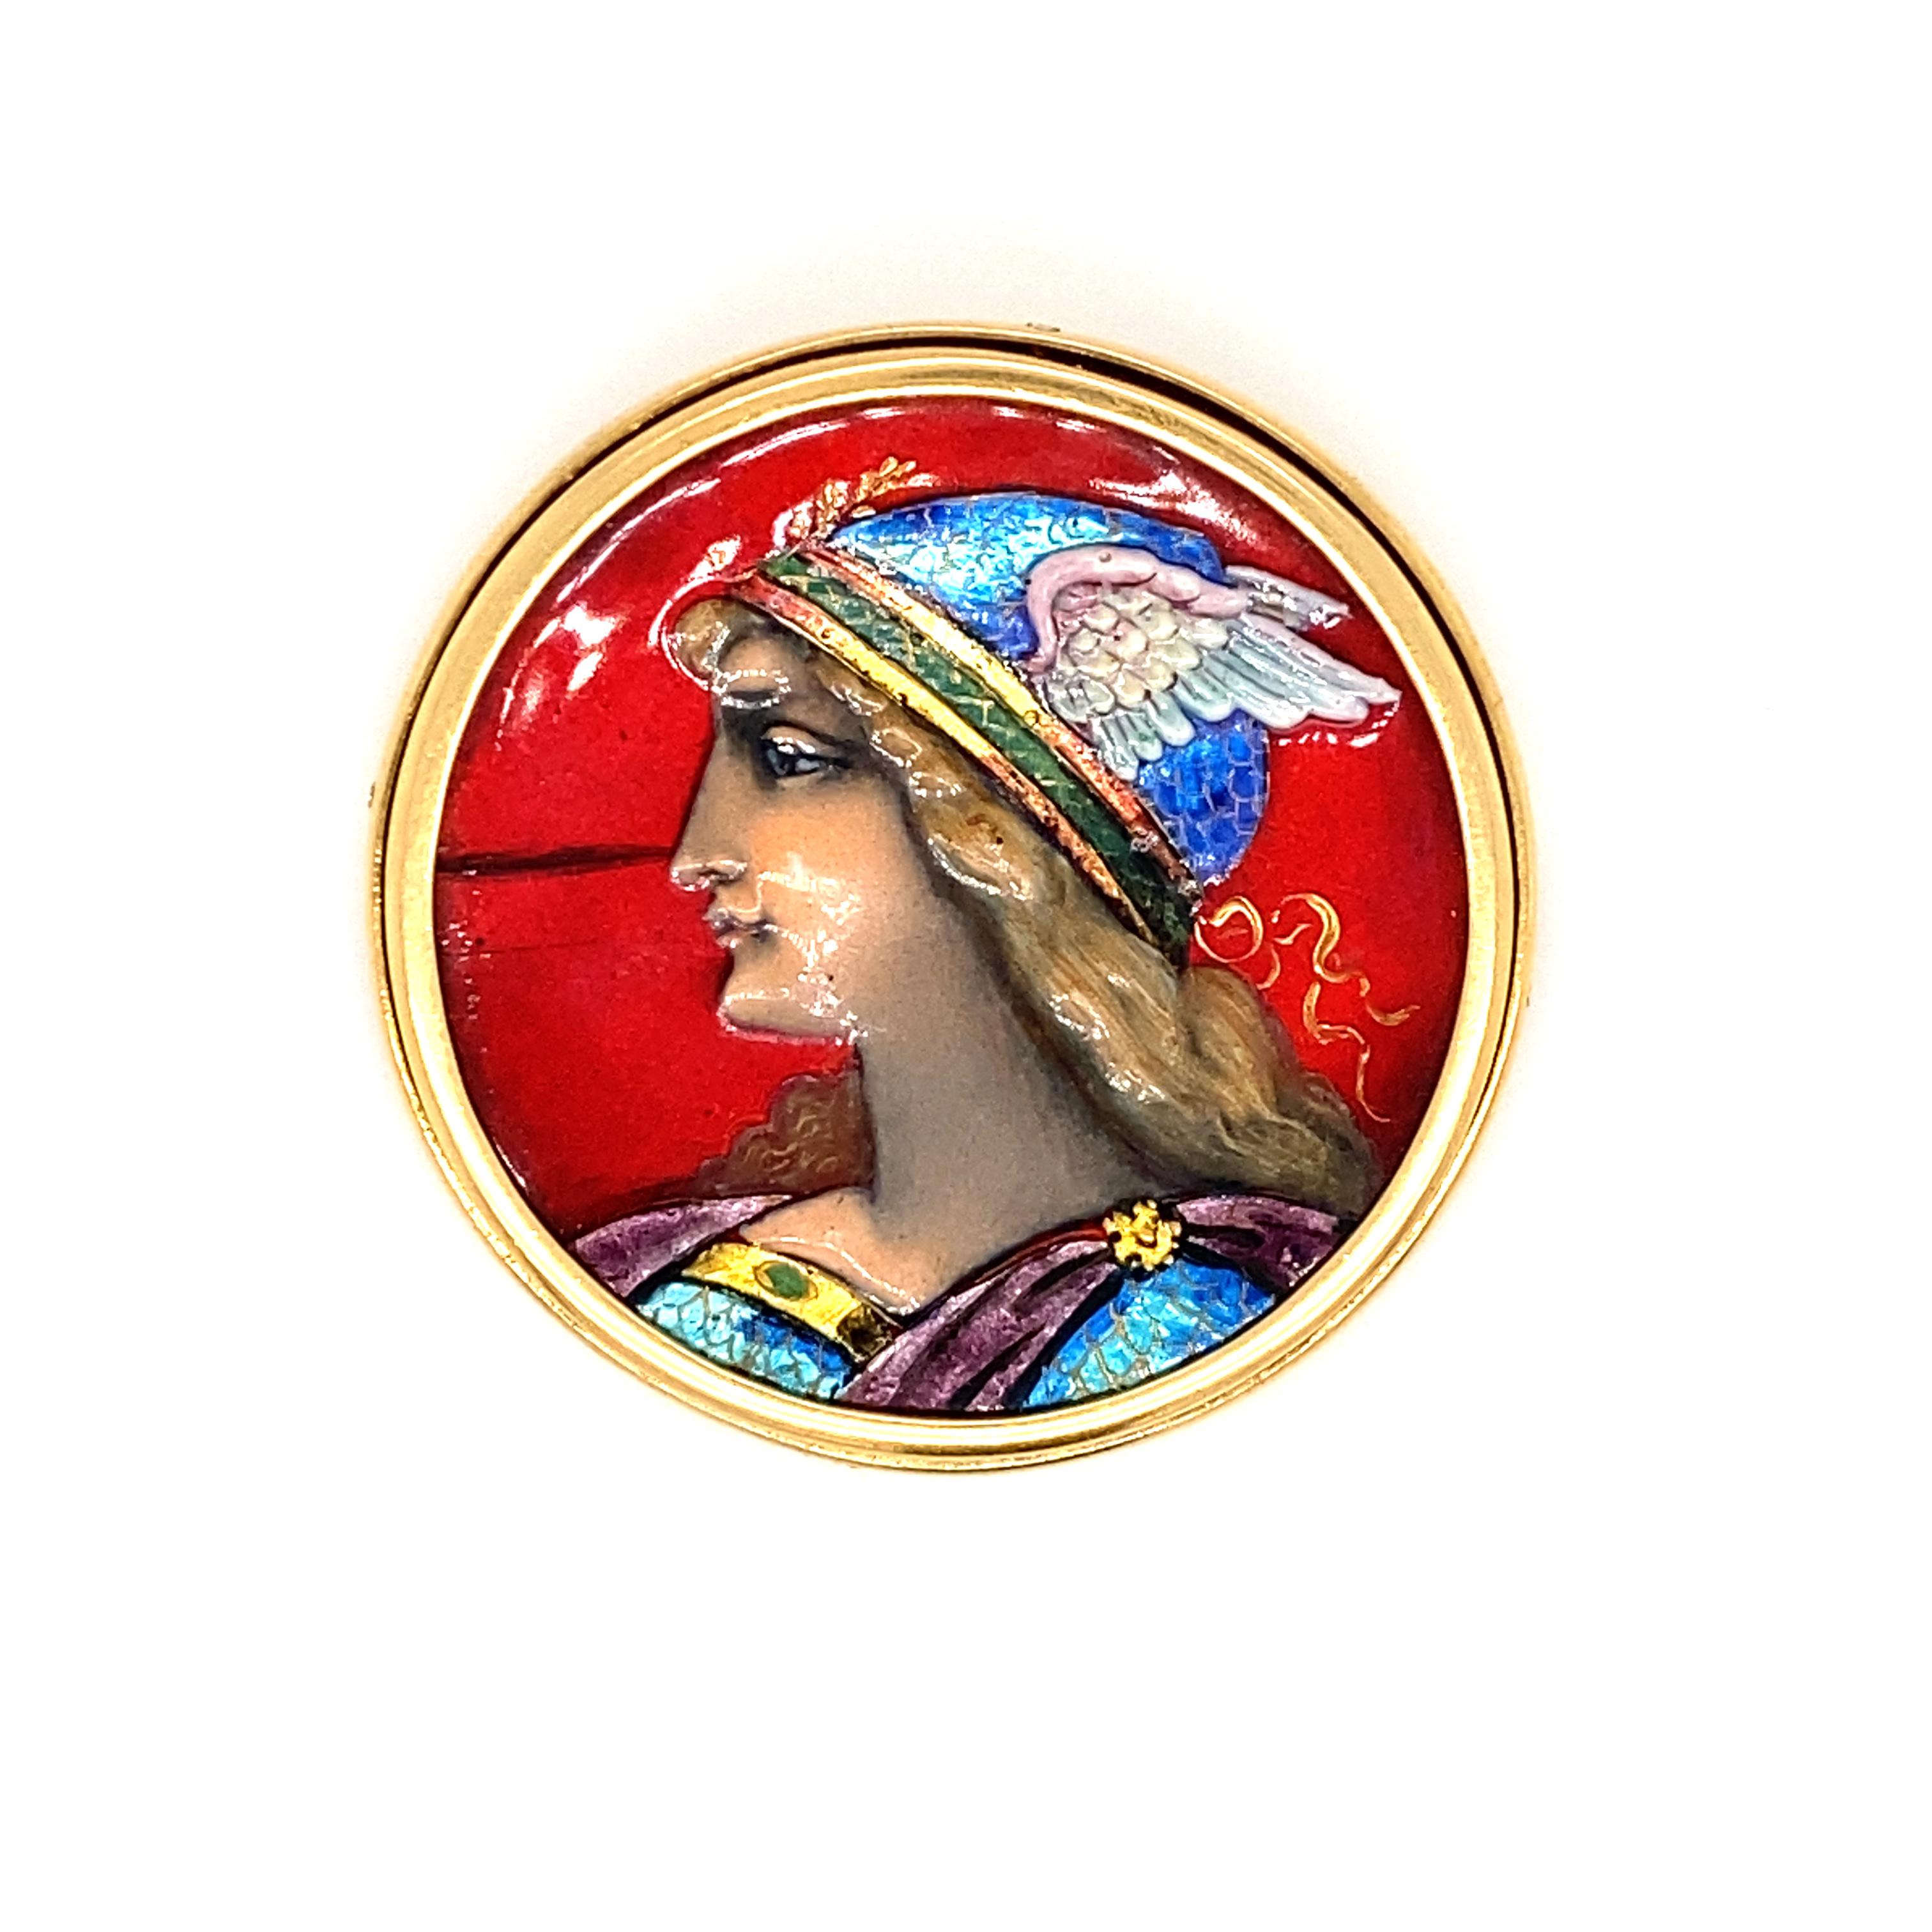 This enamel portrait brooch is handmade from Switzerland. Its brilliant enamel design depicts a mythological warrior. The frame of this enamel brooch is made in 18 karat gold and is stamped 